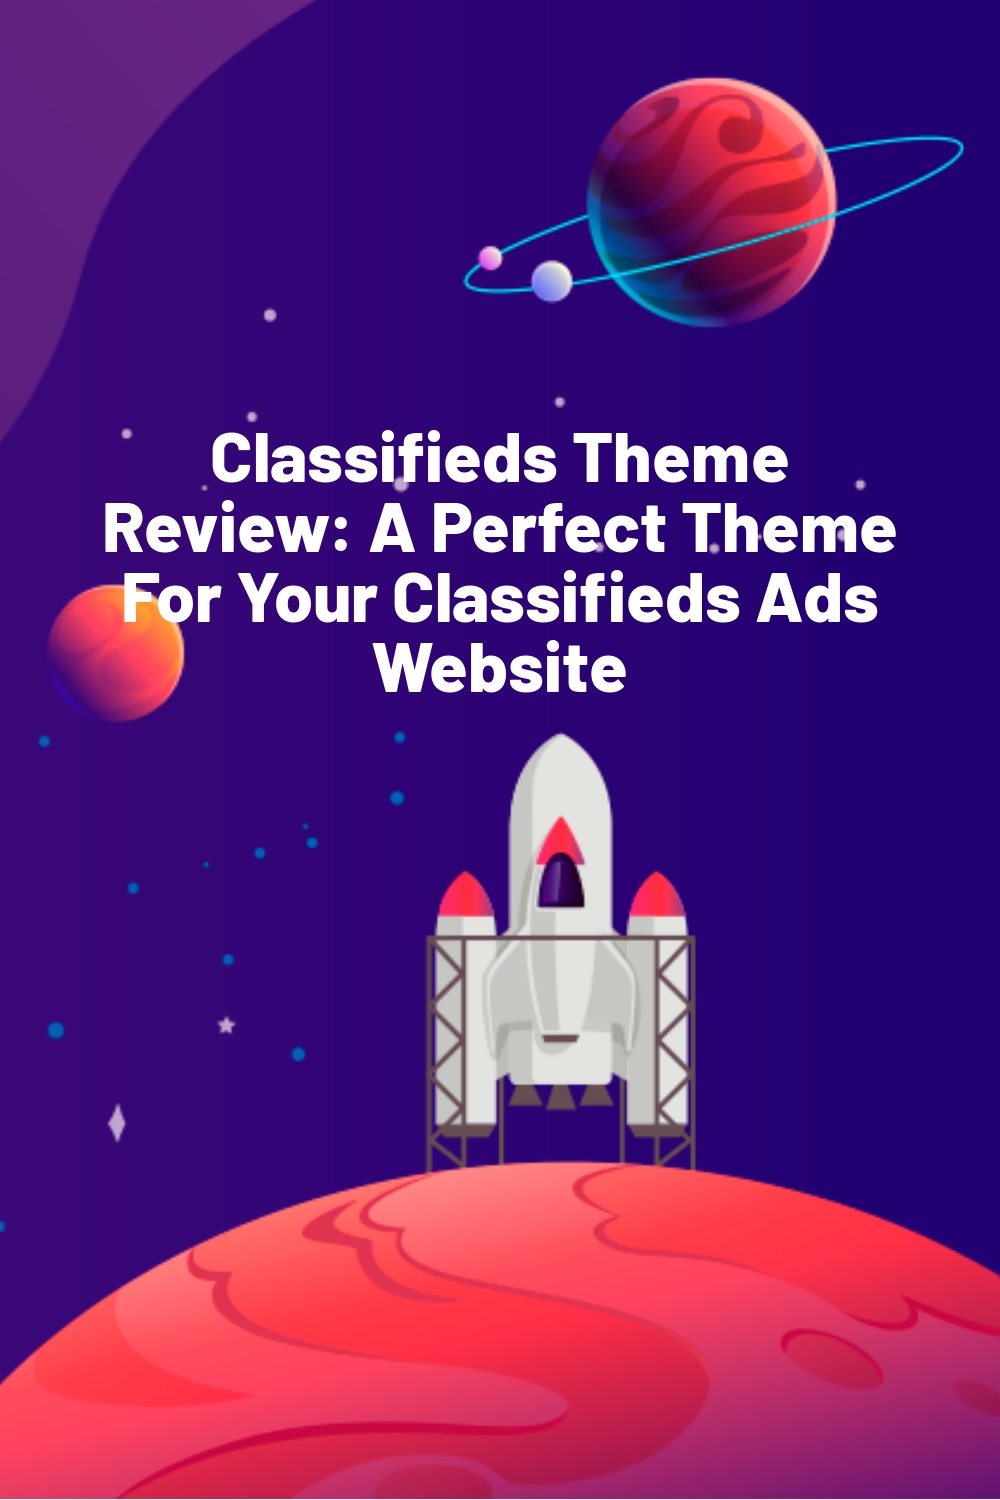 Classifieds Theme Review: A Perfect Theme For Your Classifieds Ads Website